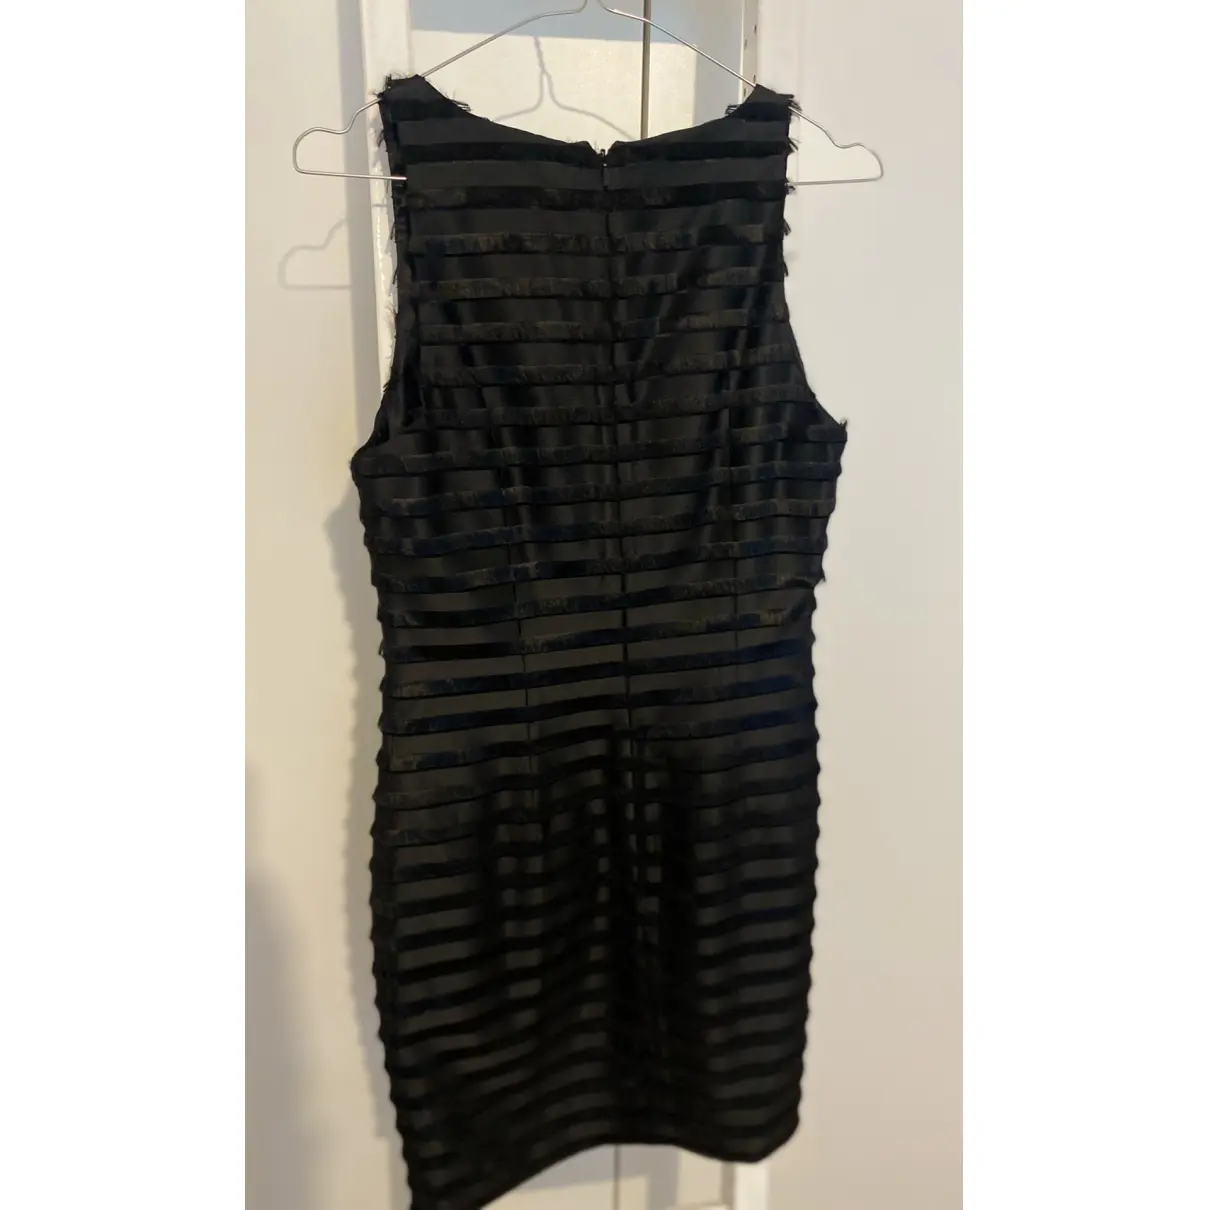 Buy French Connection Mini dress online